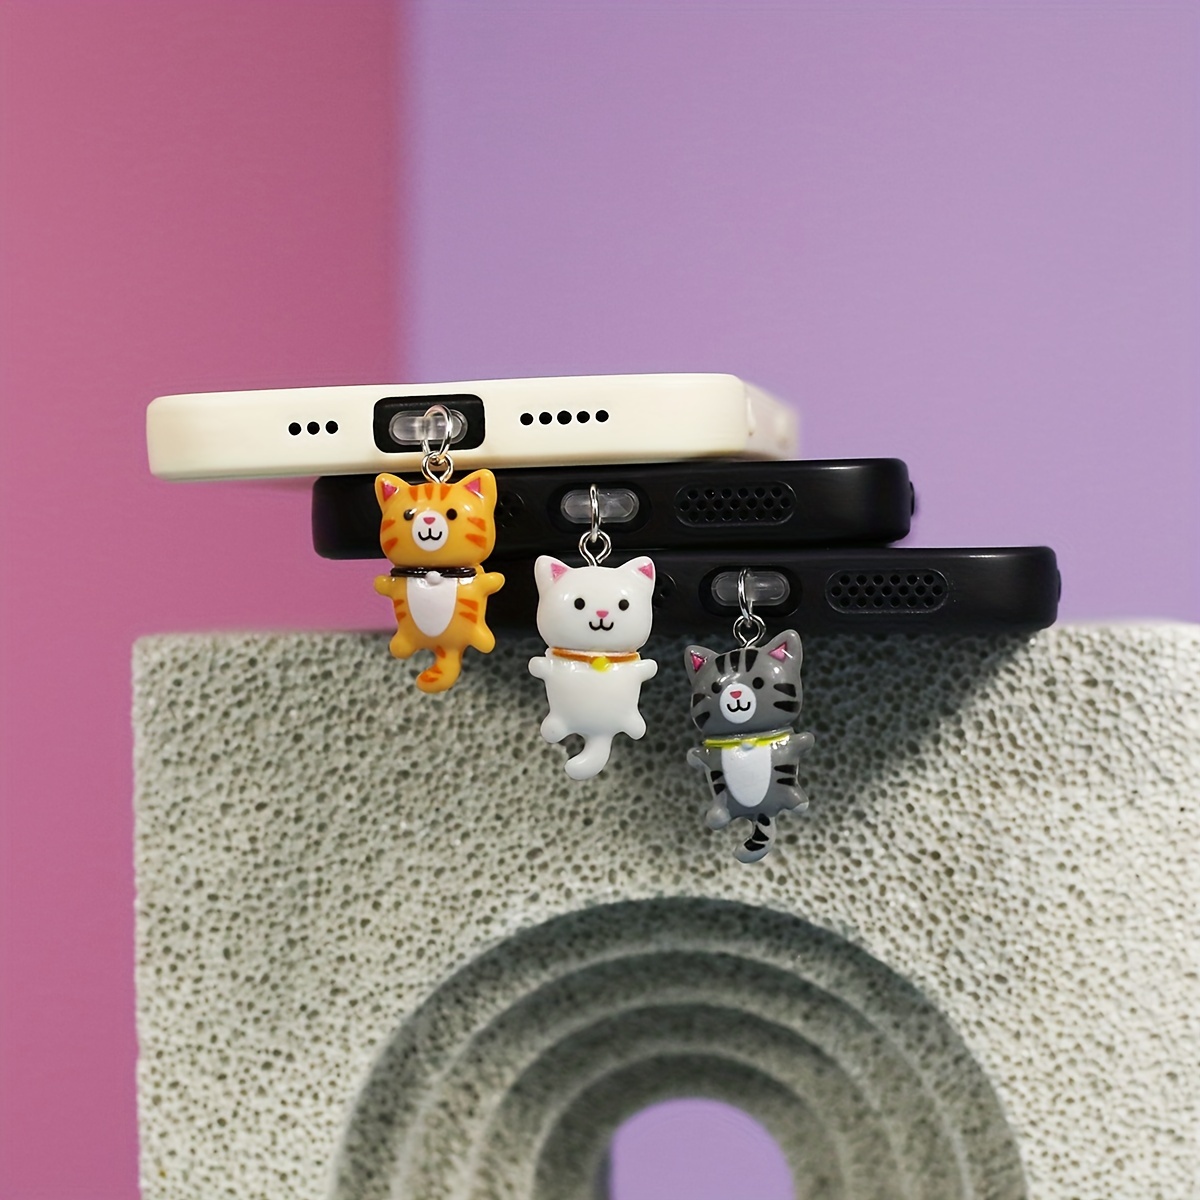 

Three-color Kittens, Cute Phone Dust Plug Accessories And Decorations, Dust-proof And Dirt-proof For Iphone And For Samsung Type-c Devices